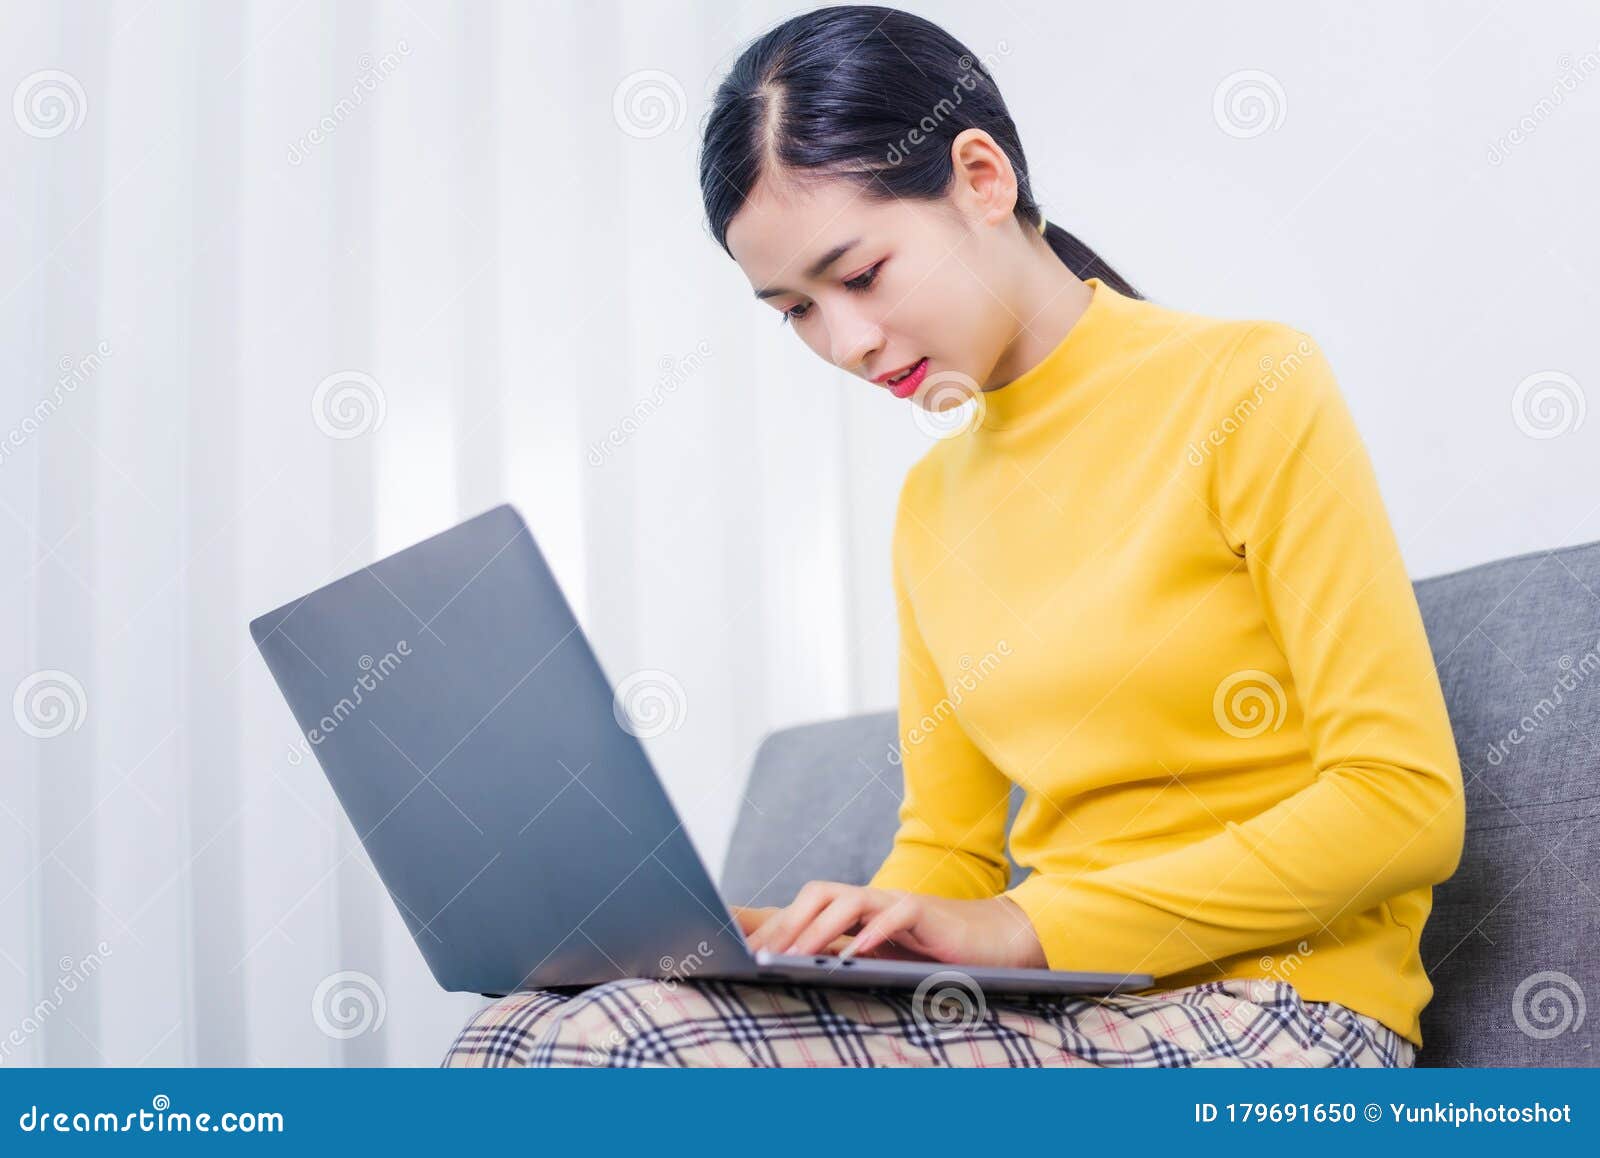 happy asian woman using laptop while sitting on sofa in living room, wfh work from home concept